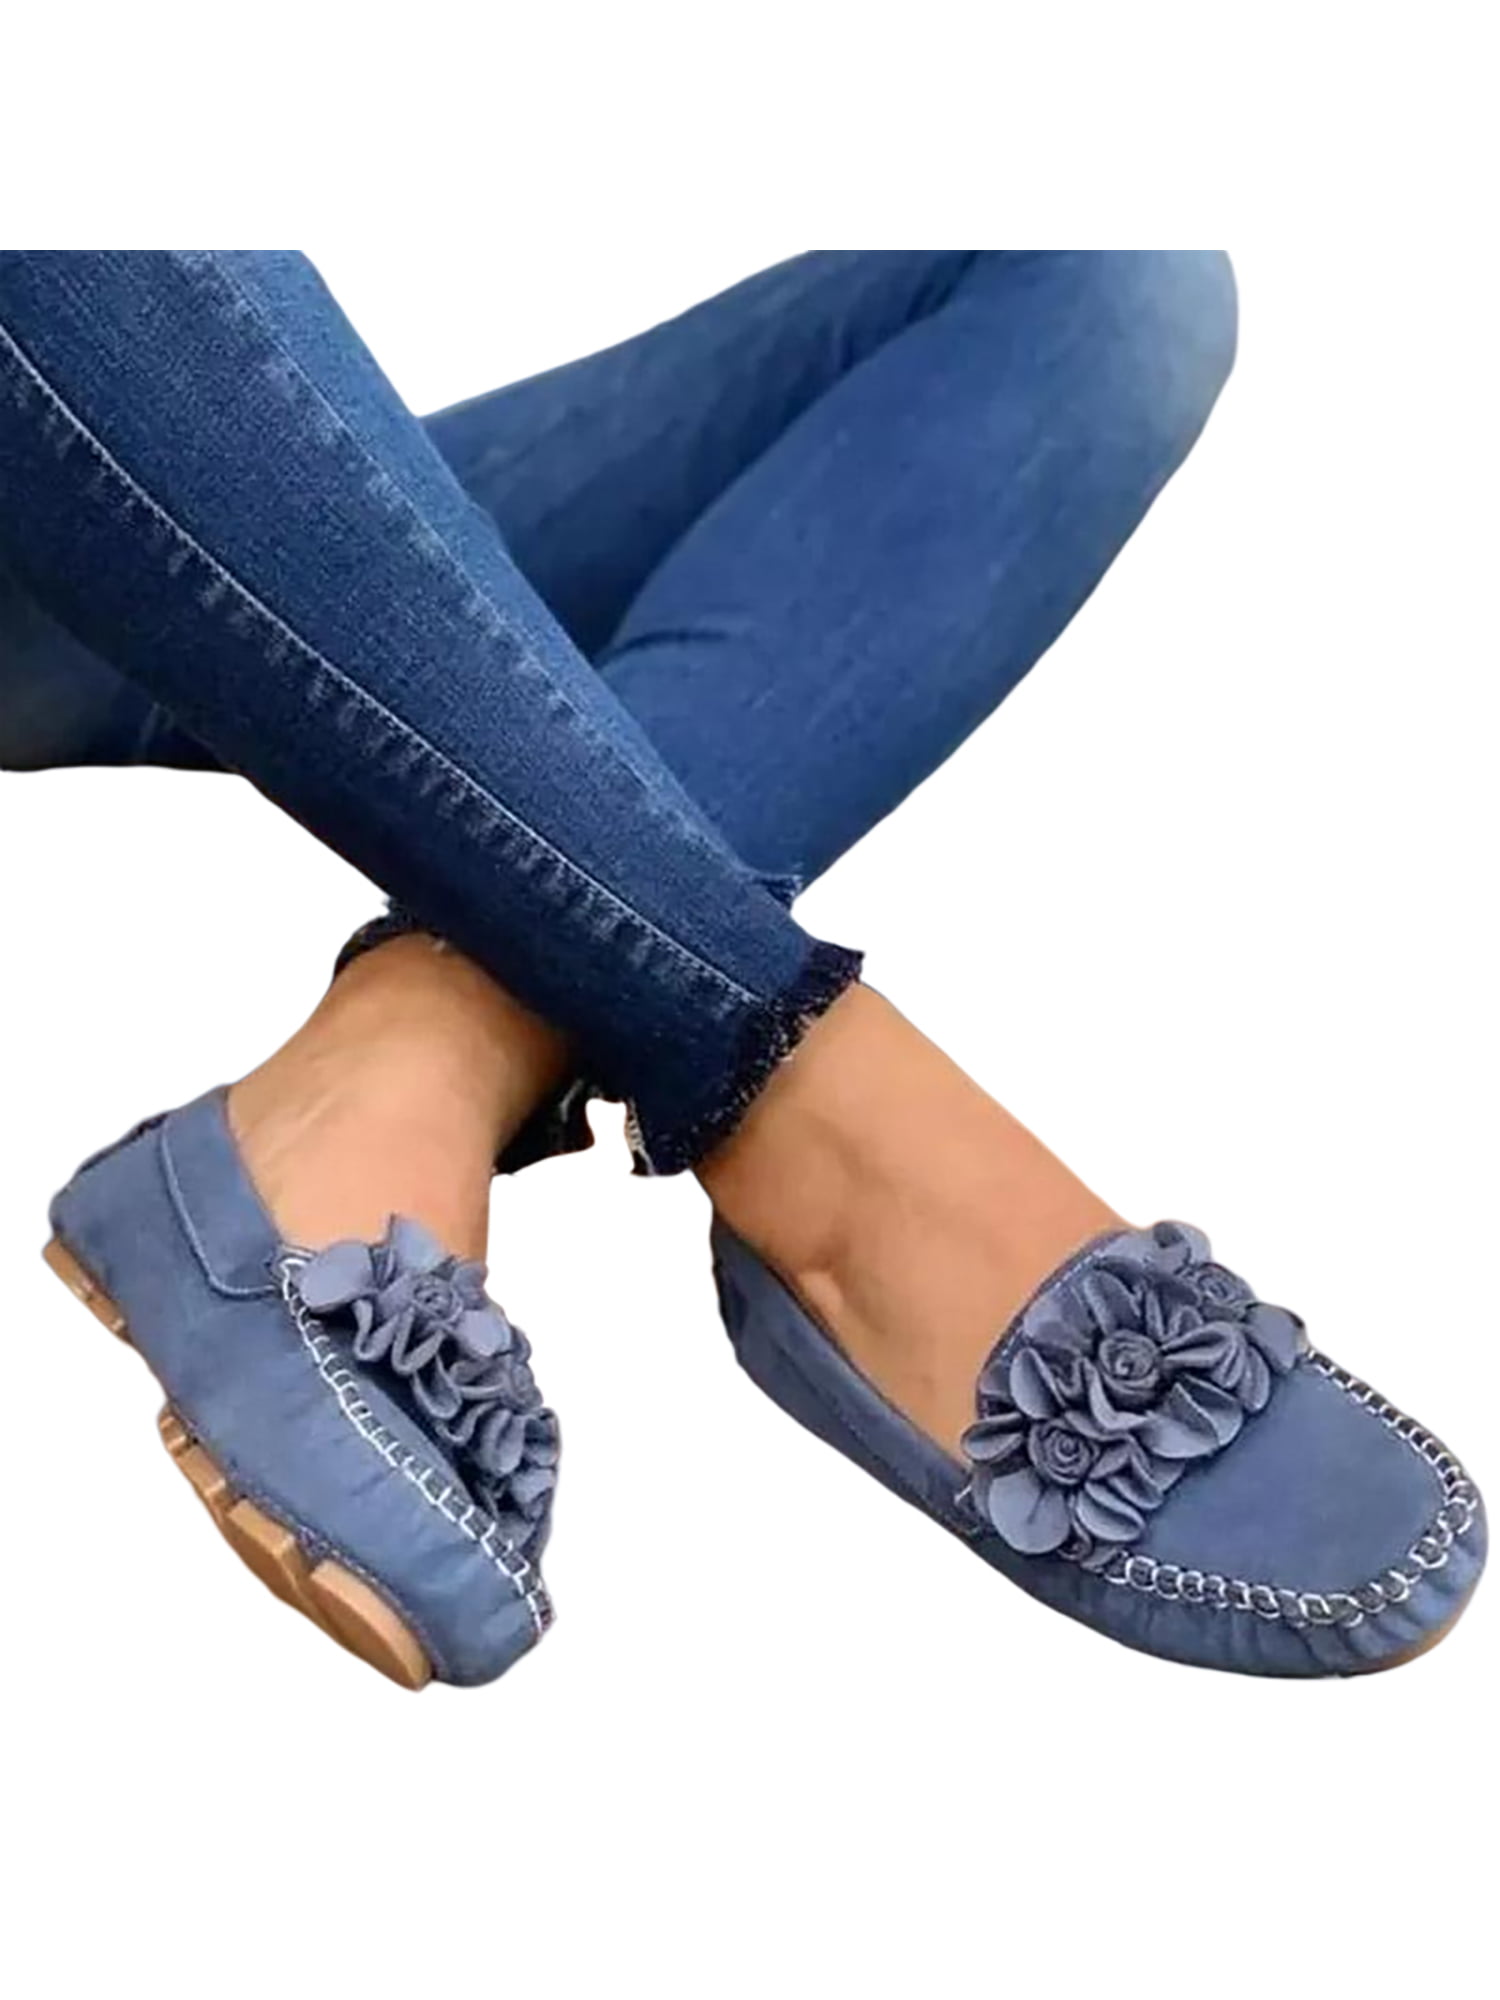 Women Office Ladies Slip On Flat Shoes Loafers Casual Shoes Dress Shoes 